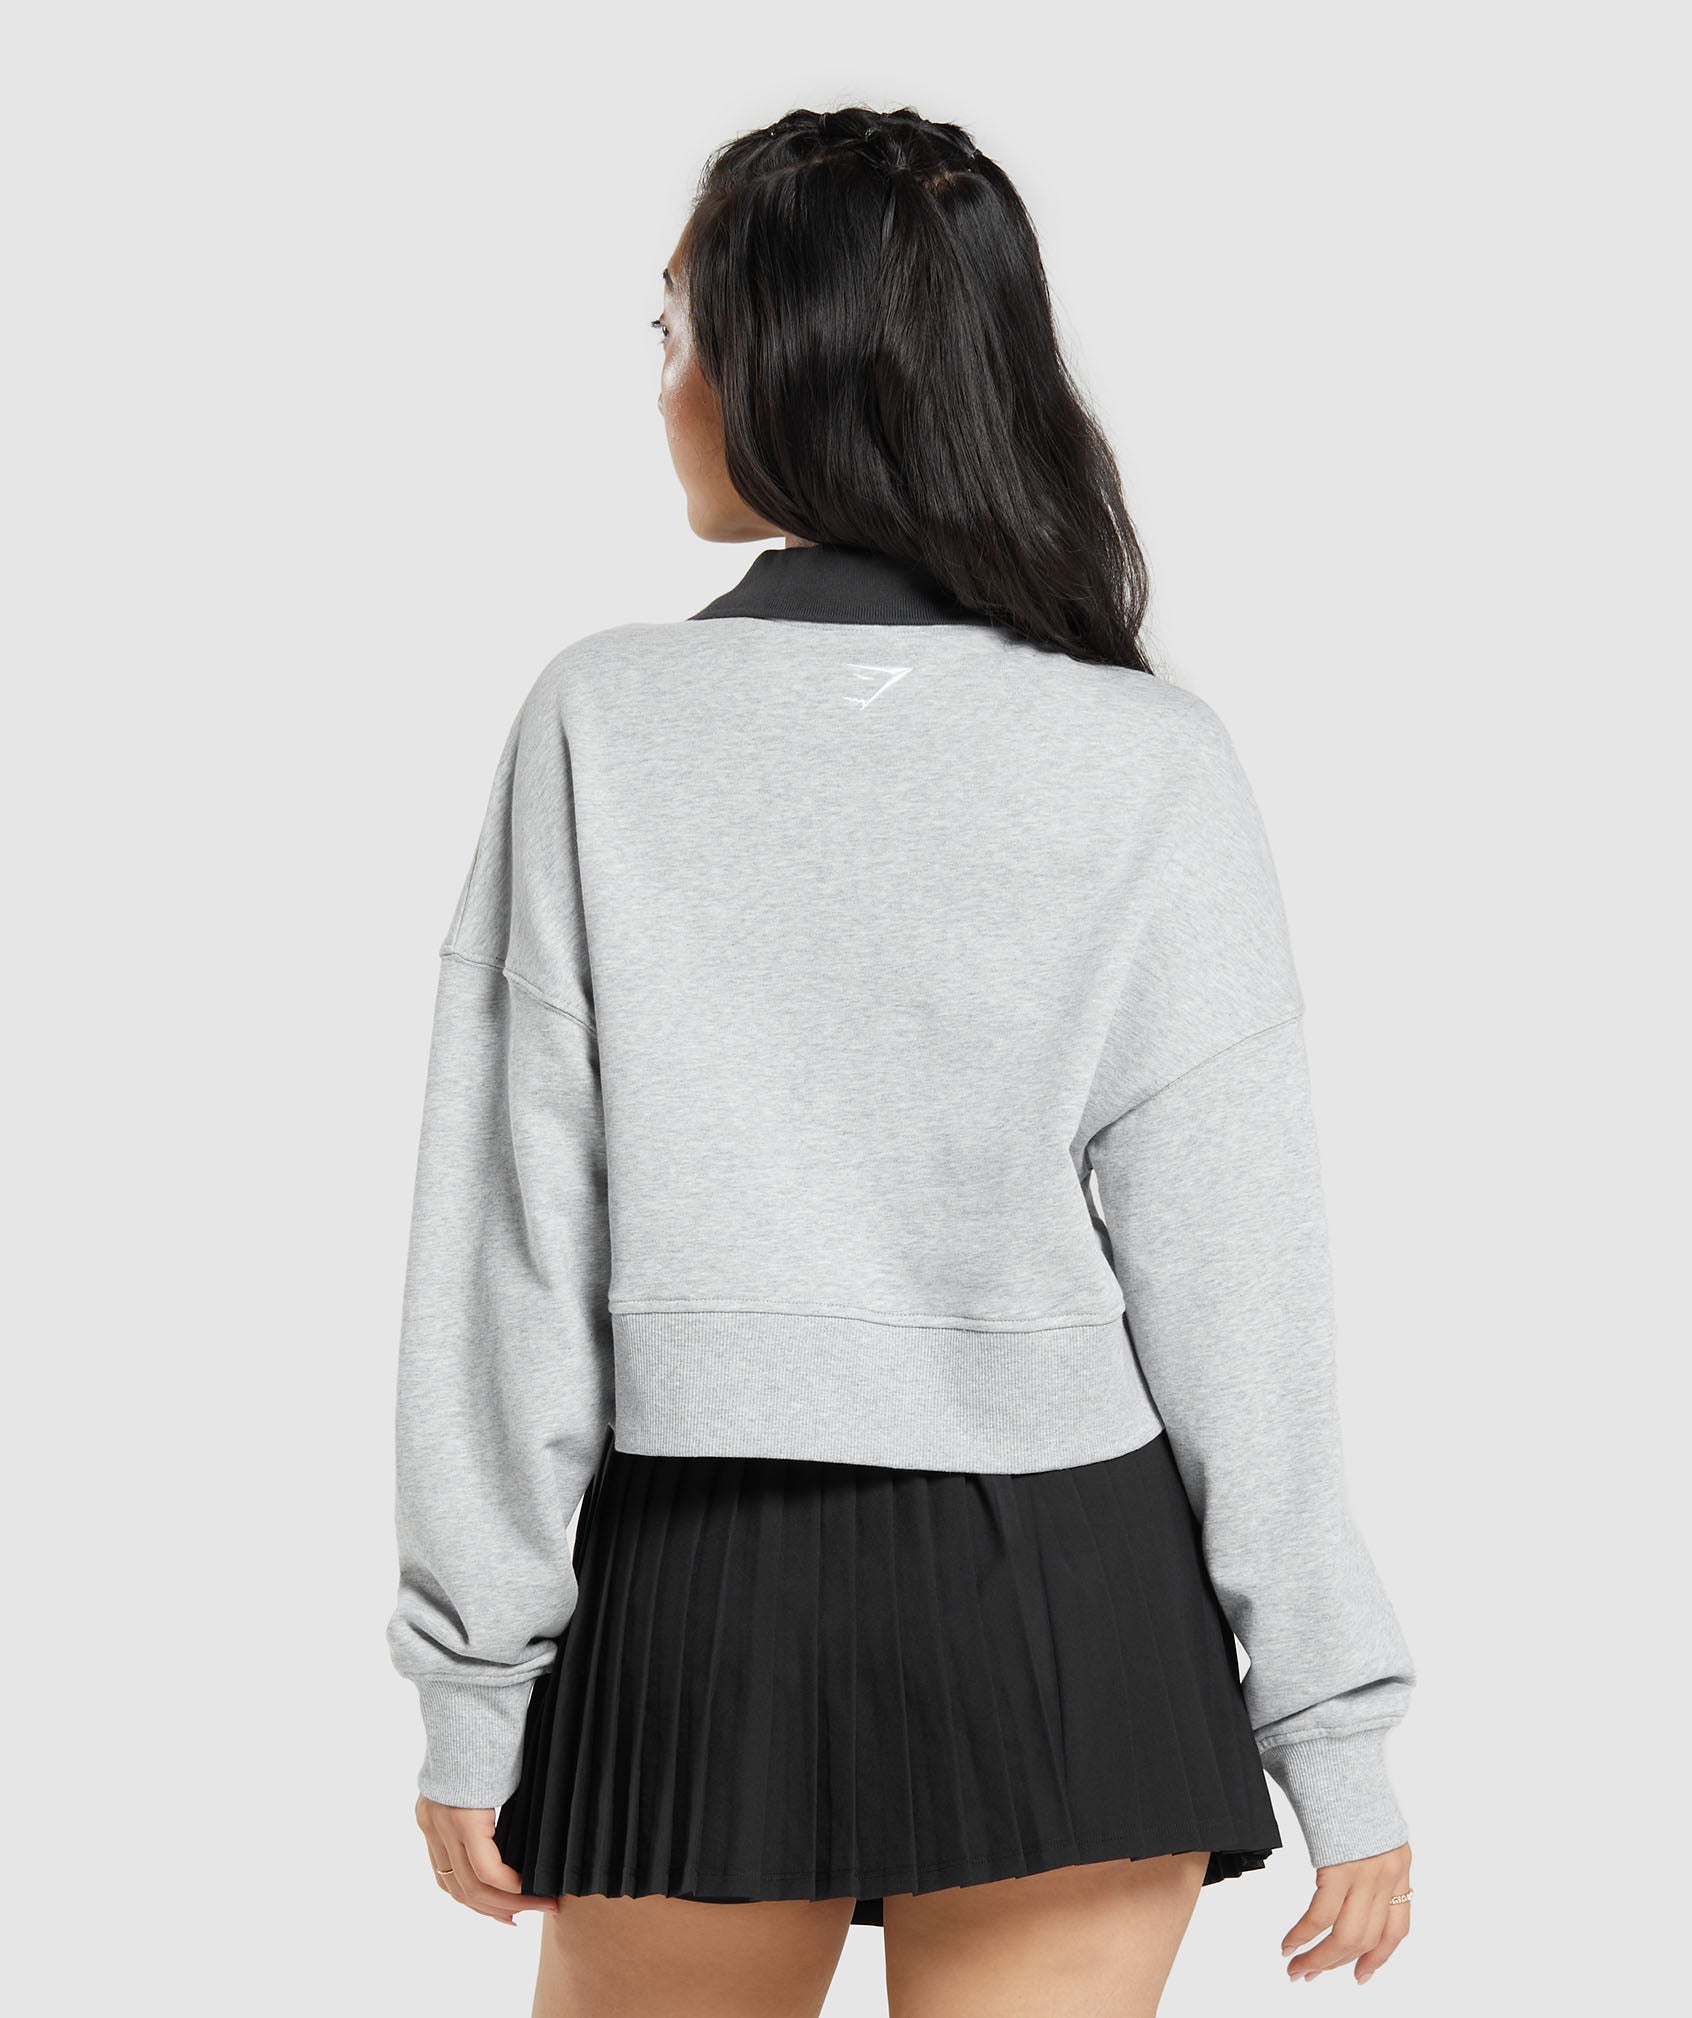 Outline Graphic Oversized 1/4 Zip Pullover in Light Grey Core Marl - view 2